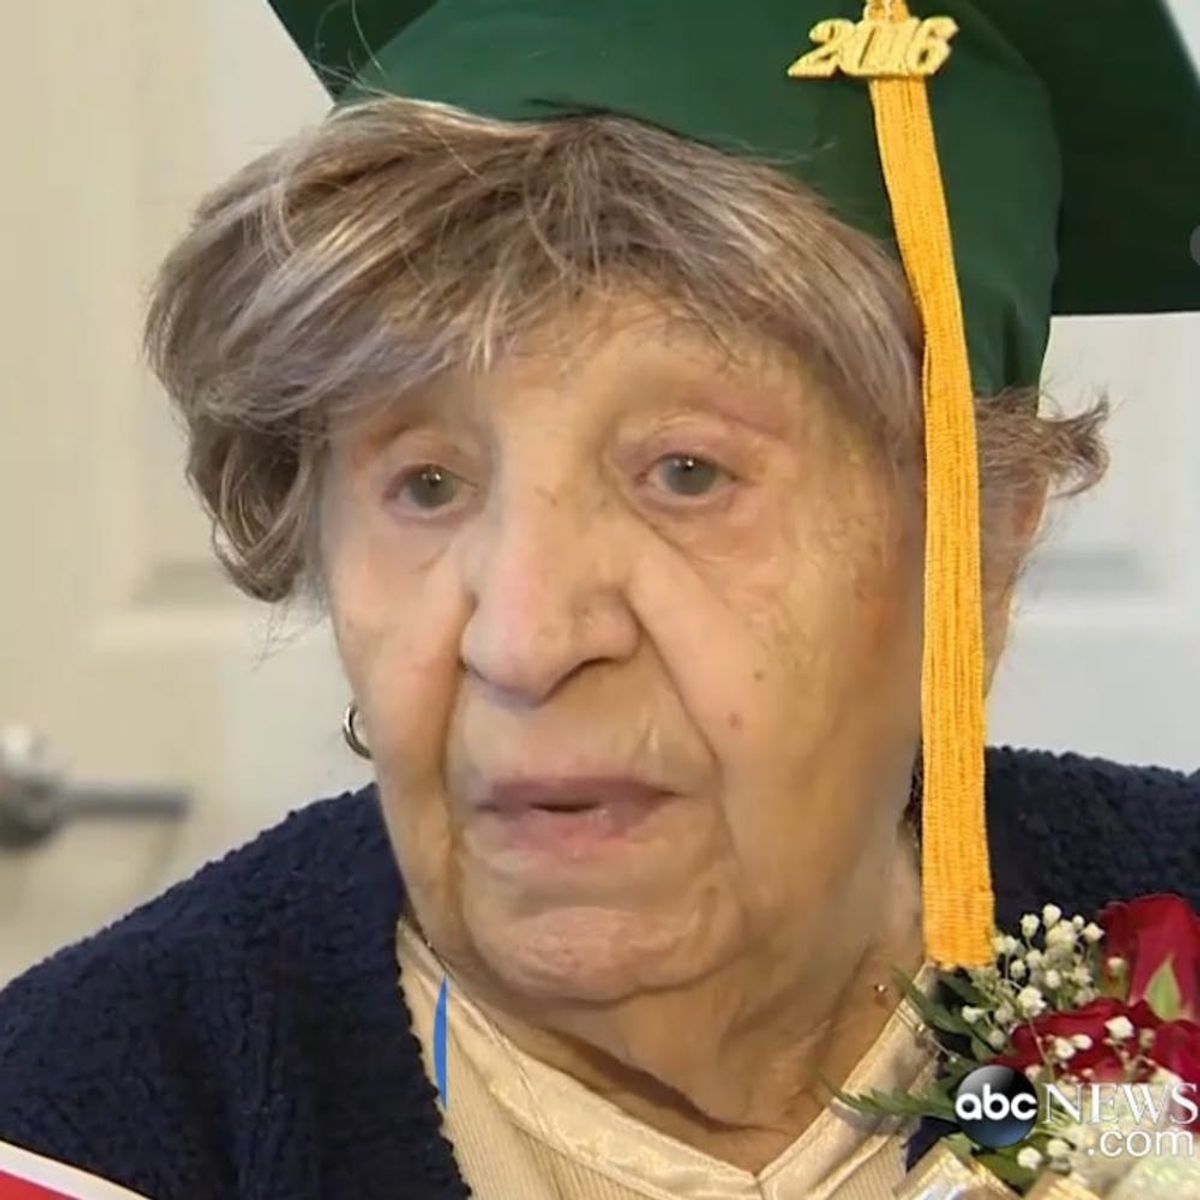 100-Year-Old Woman Who Had to Quit School to Work in a Factory *Finally* Gets Diploma